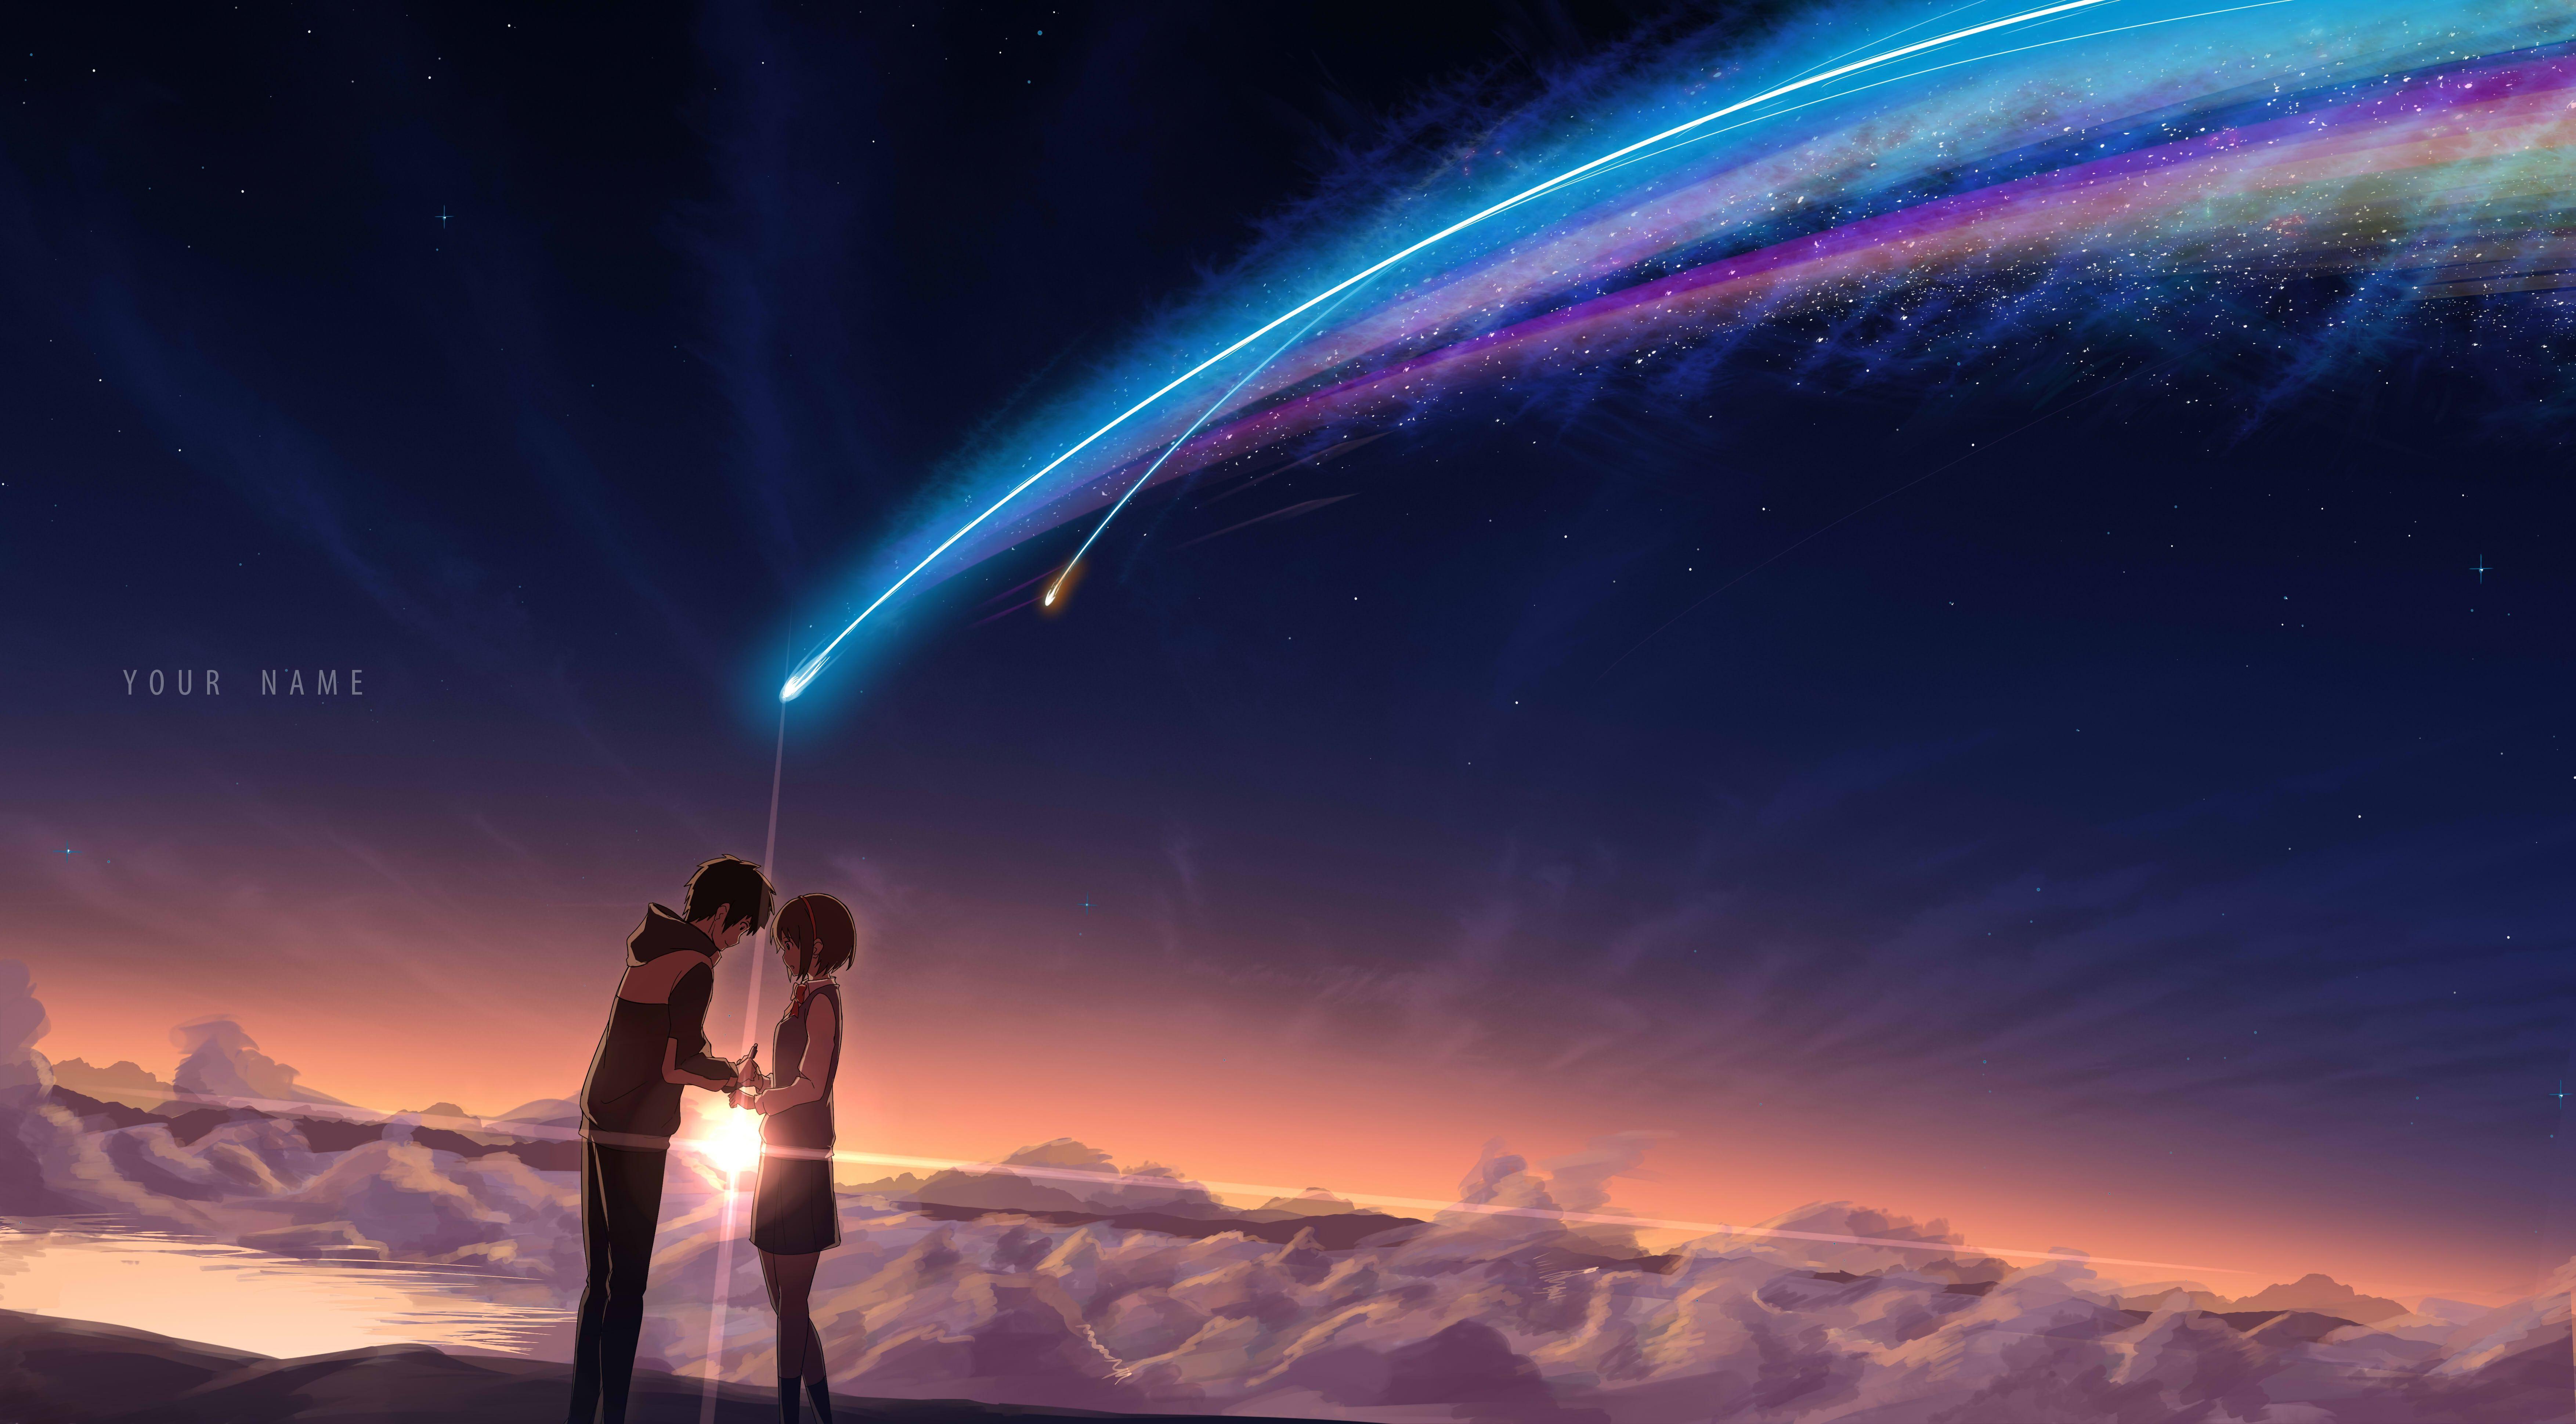 1375 Your Name. HD Wallpapers